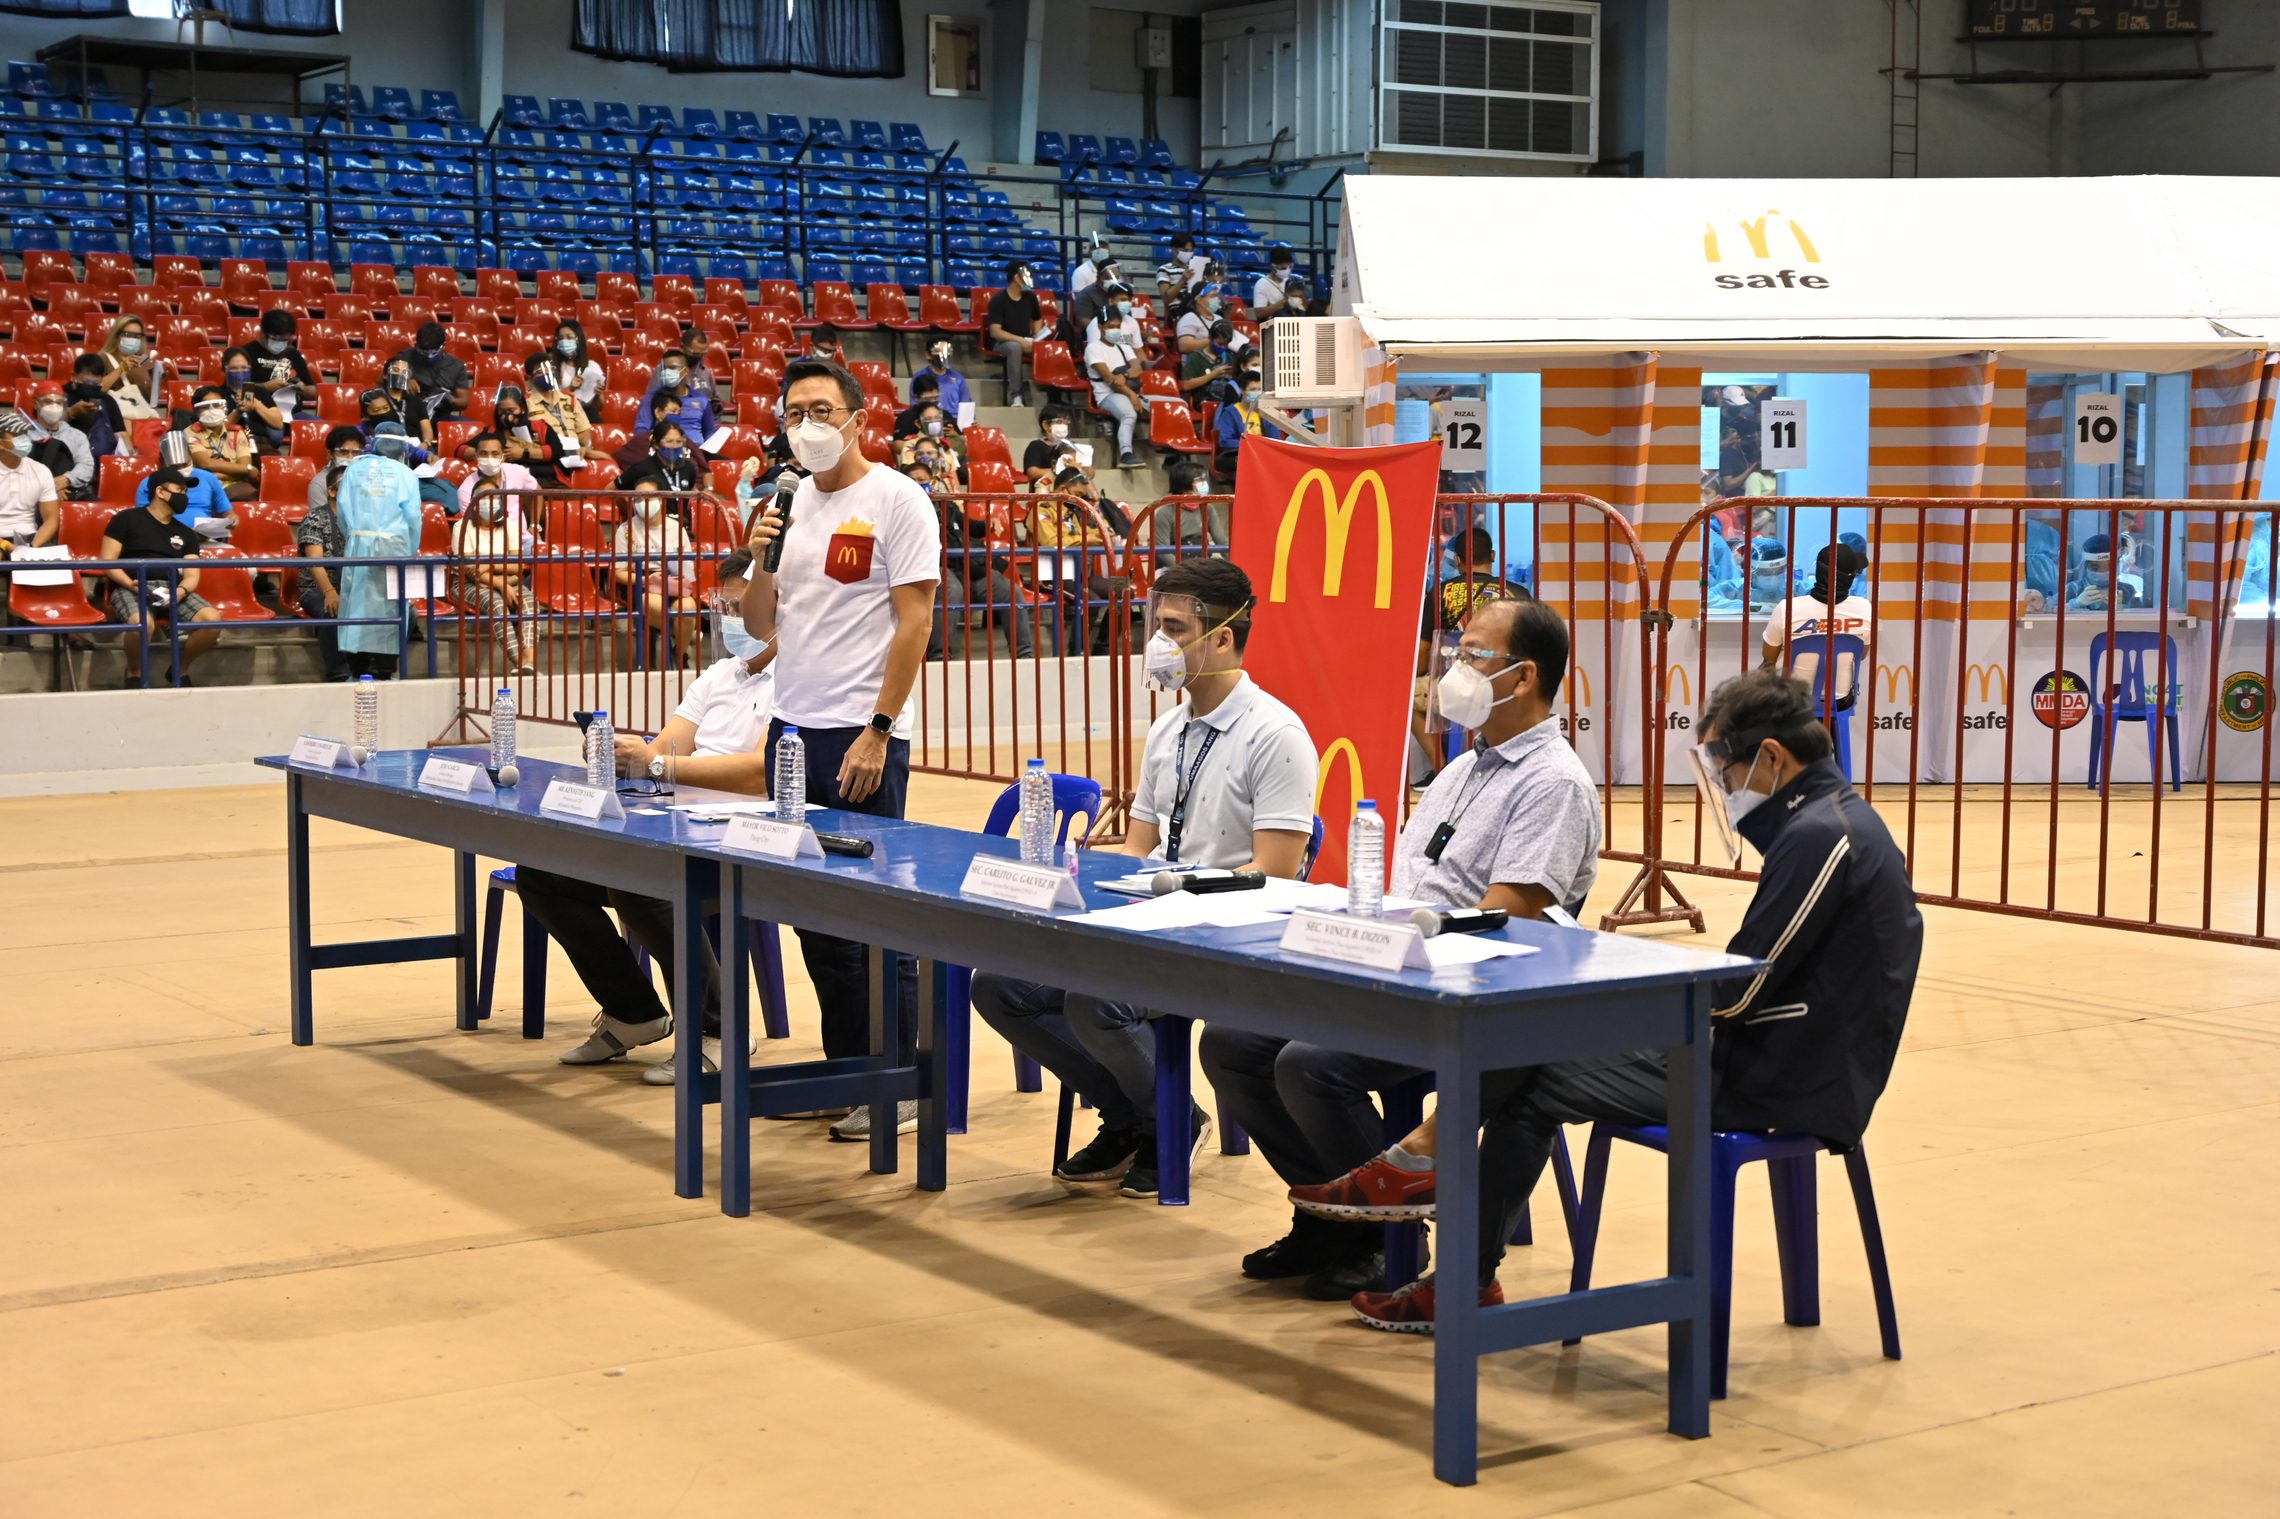 McDonald’s Philippines, in partnership with NTF, provides free COVID-19 testing for NCR restaurant employees